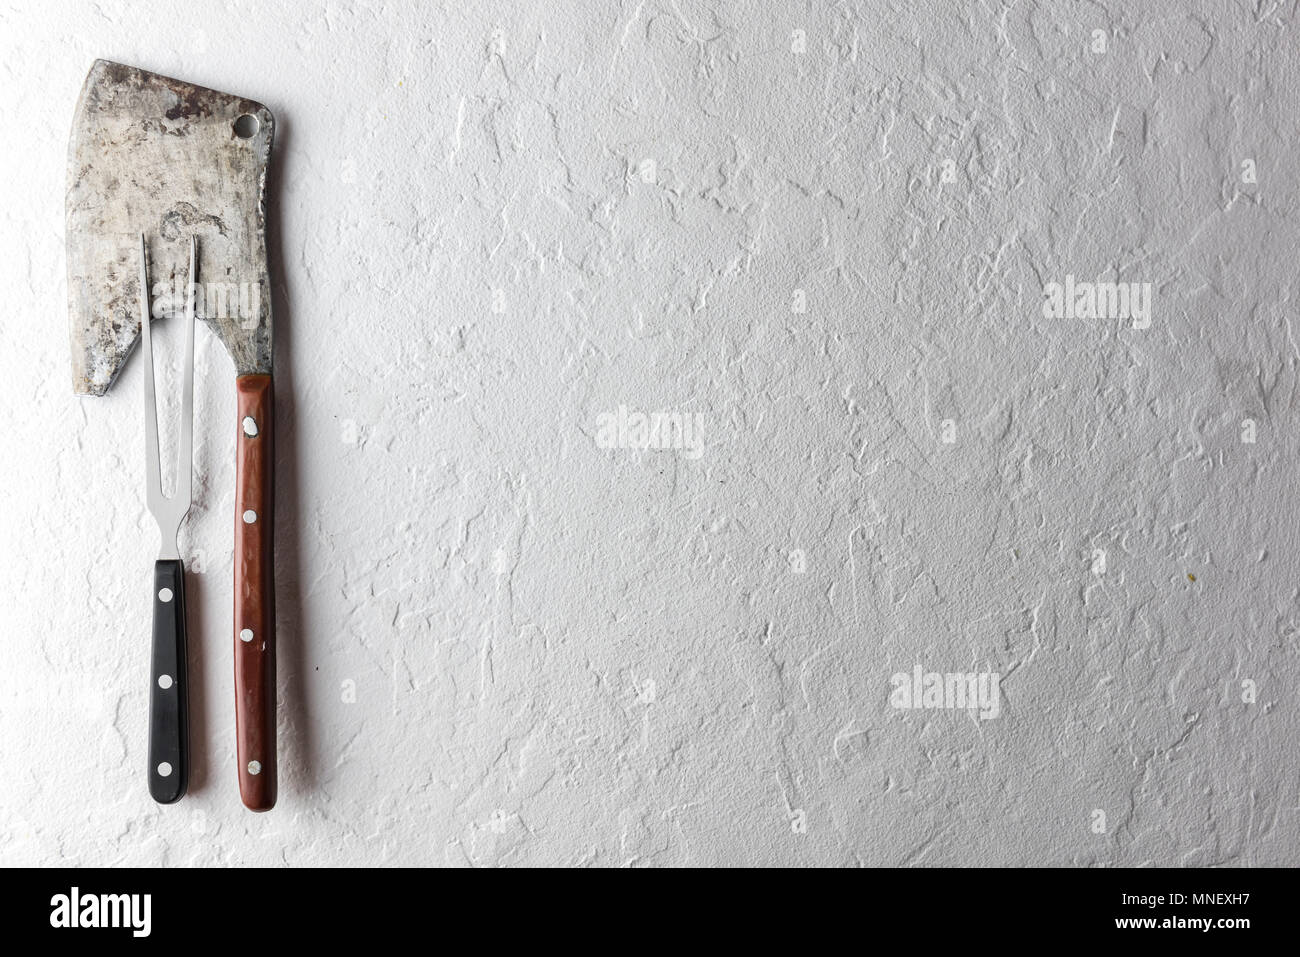 Old rustic axe for meat on a wooden board Stock Photo